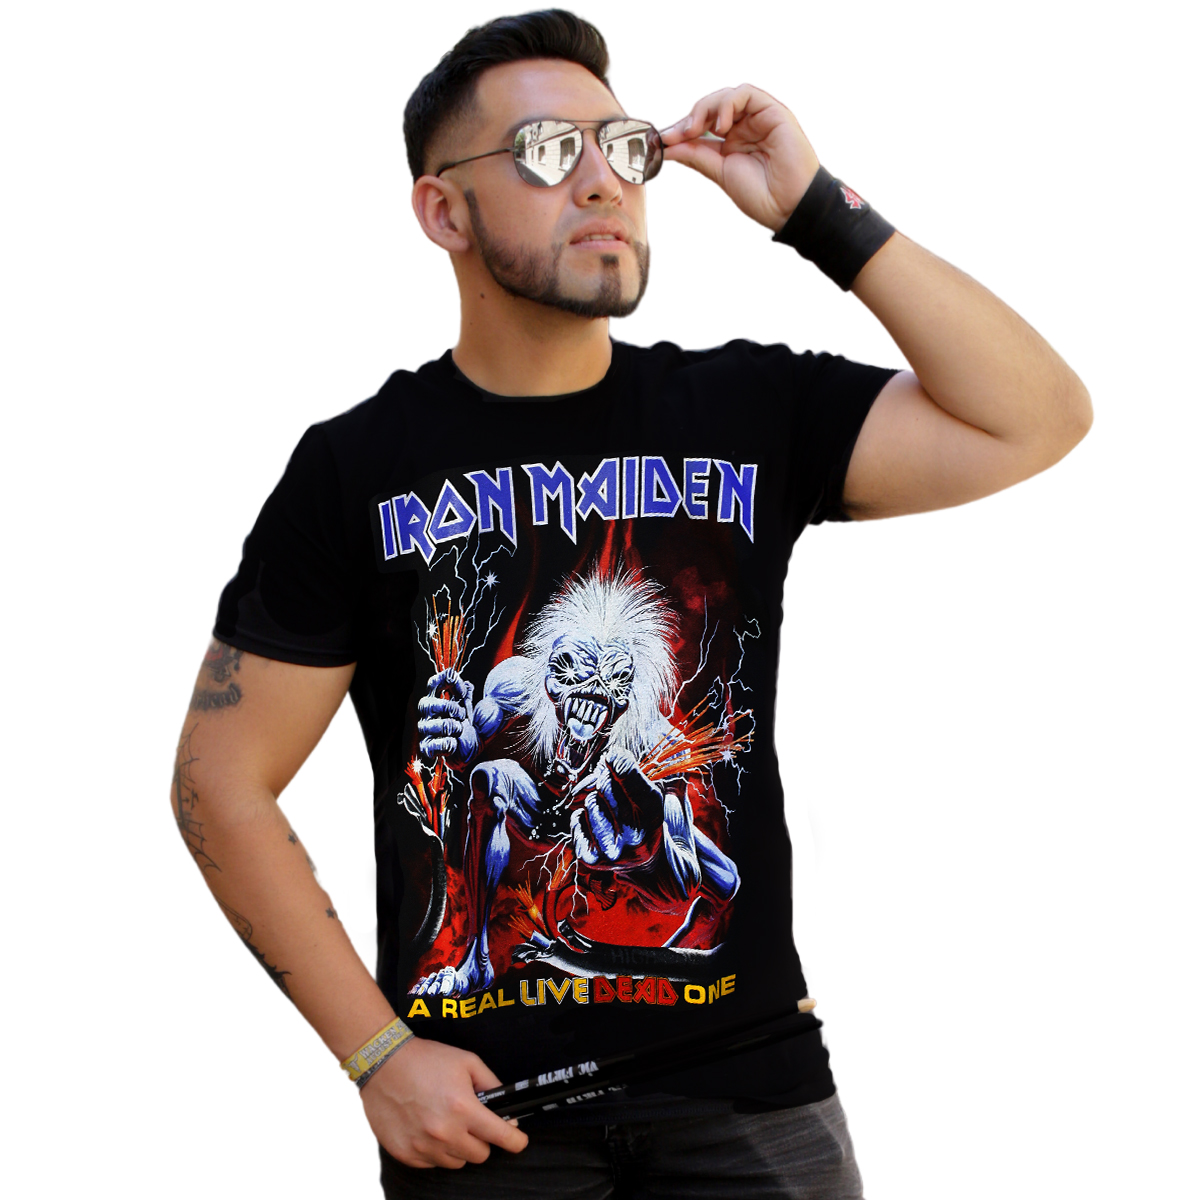 POLERA IRON MAIDEN A REAL LIVE DEAD ONE